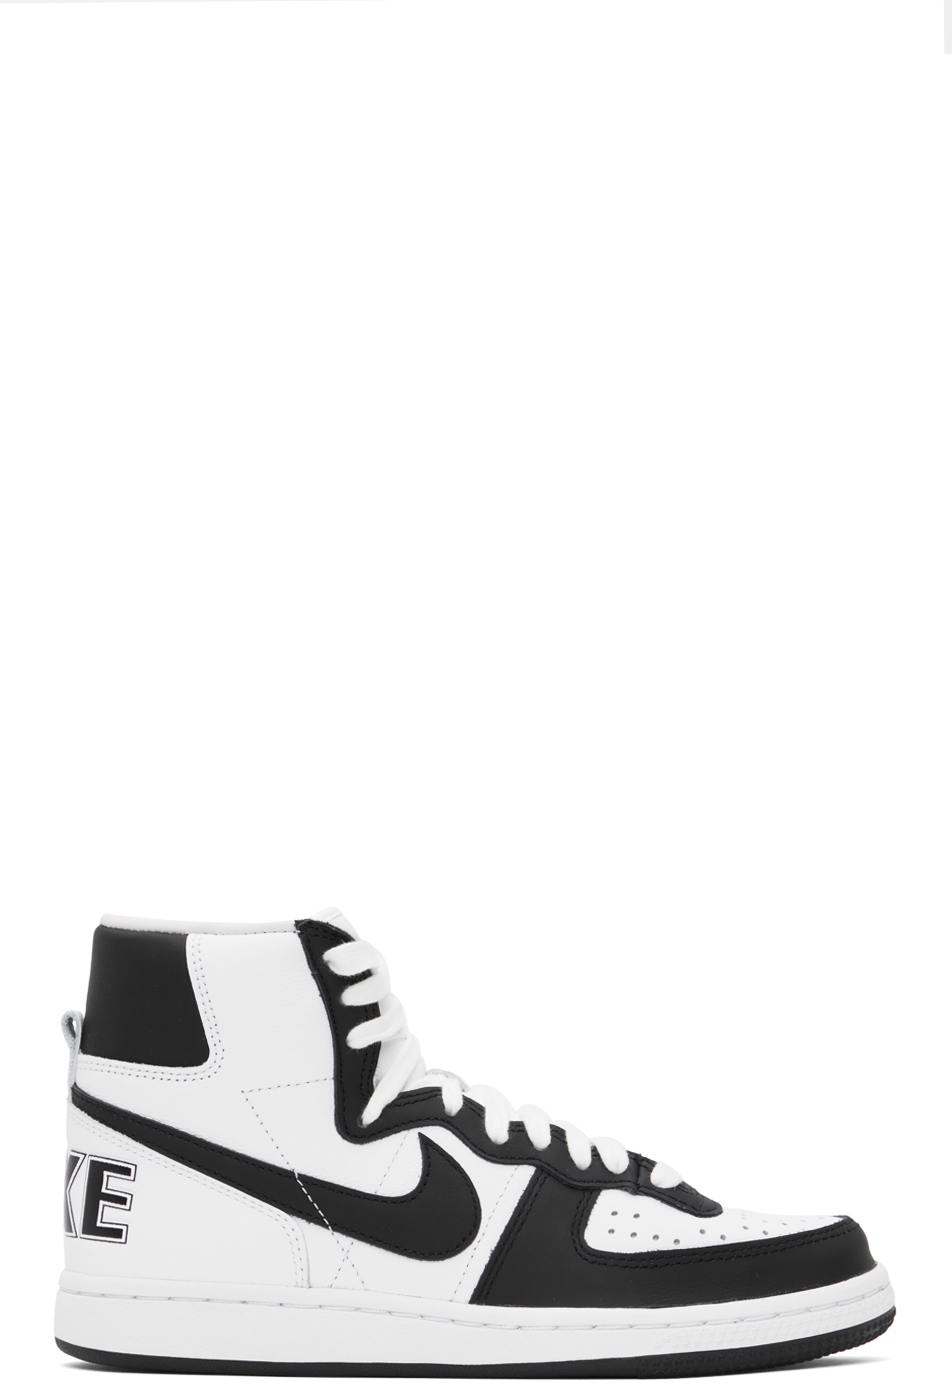 Black & White Nike Edition Terminator High Sneakers by Comme des